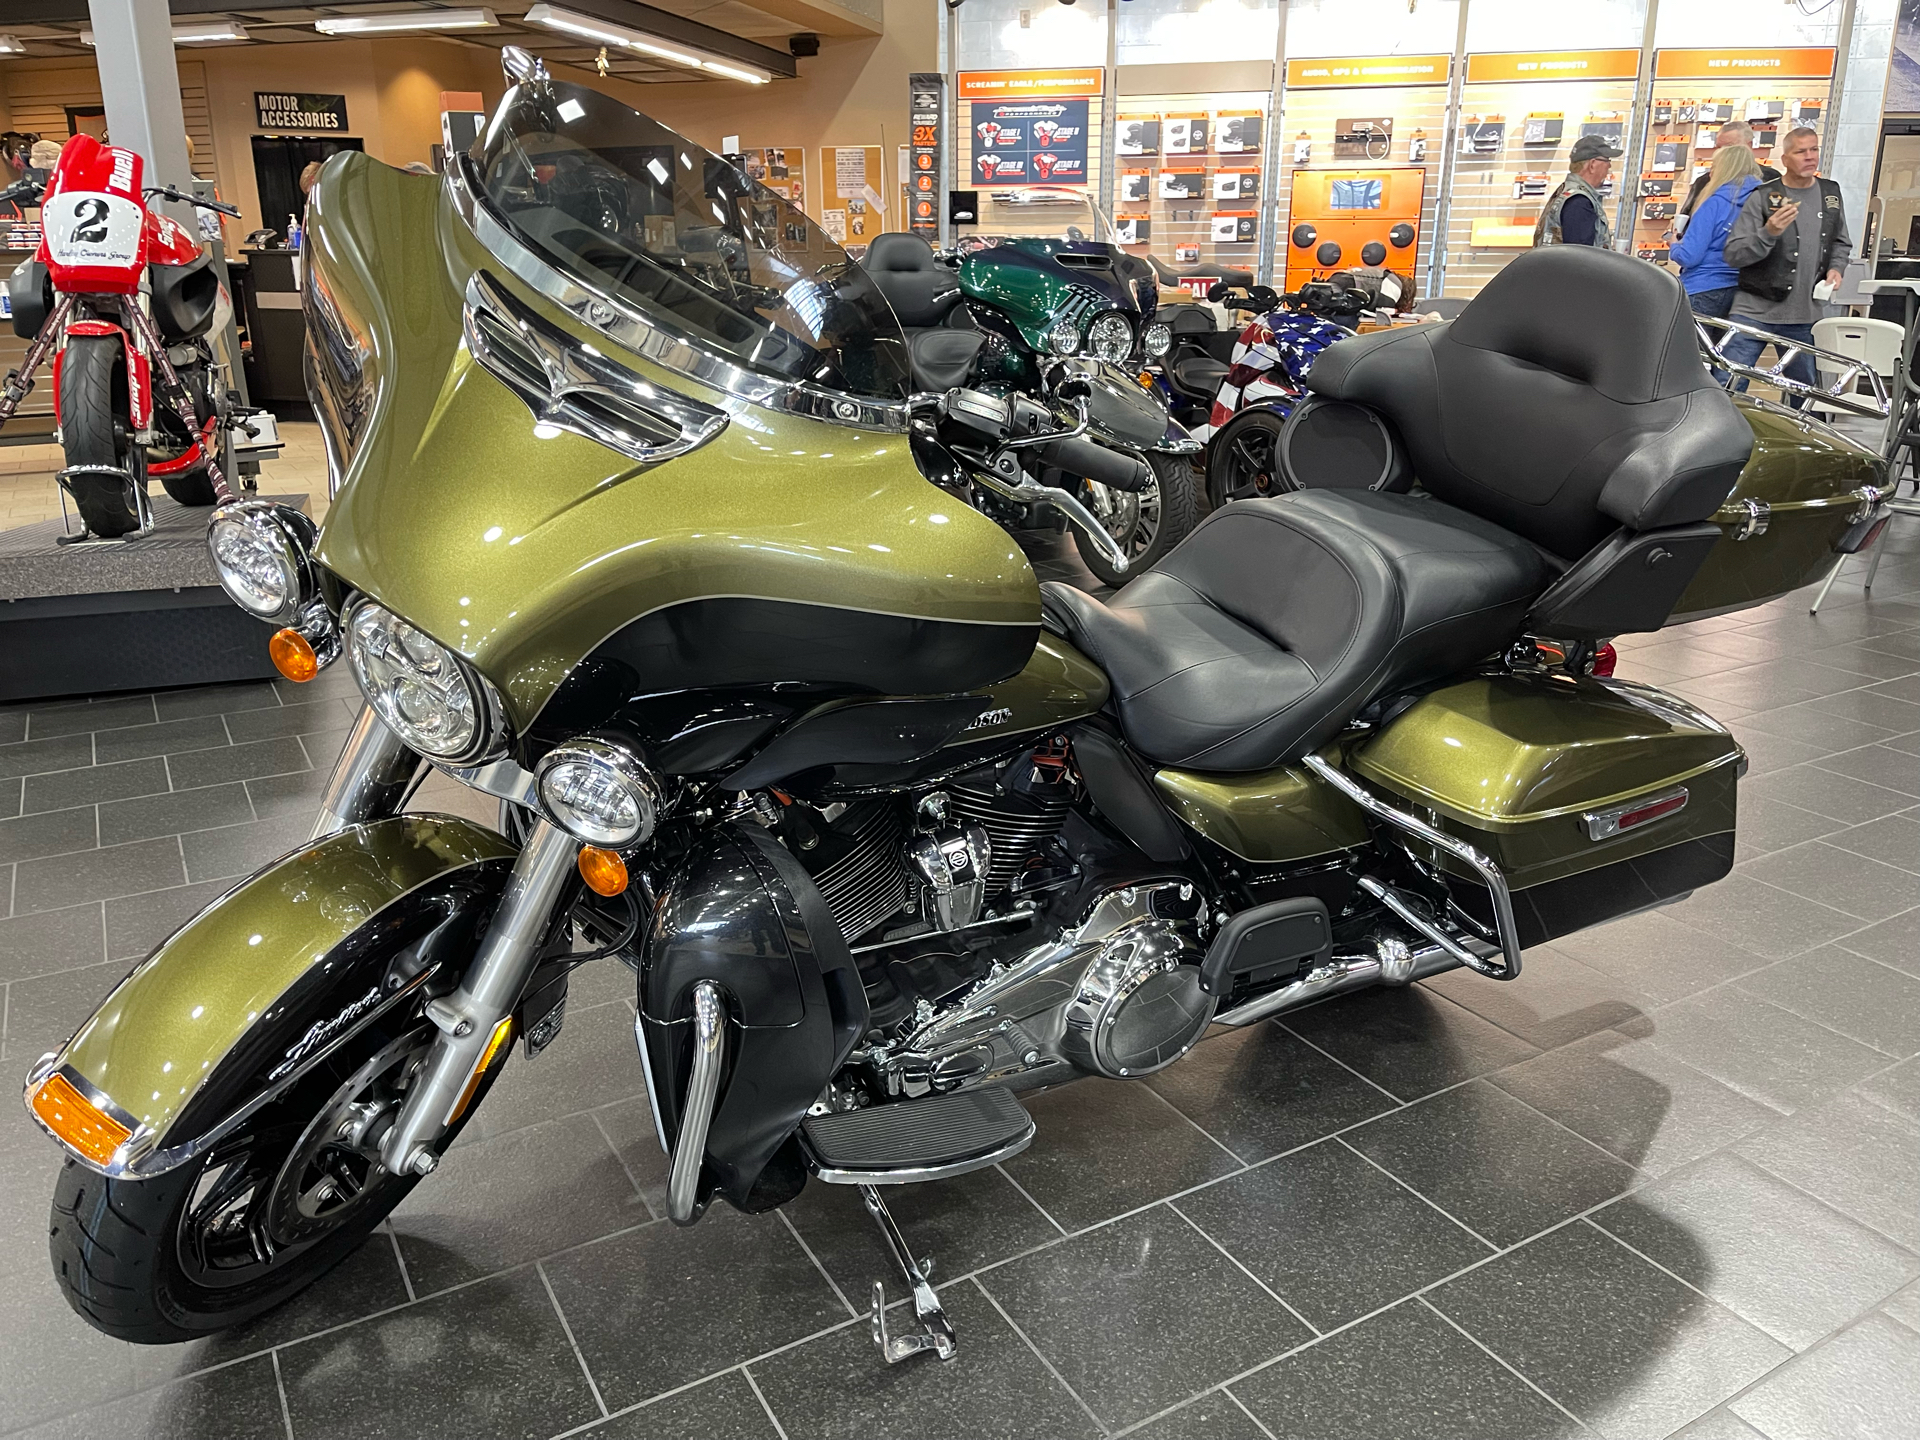 2018 Harley-Davidson Ultra Limited in The Woodlands, Texas - Photo 3